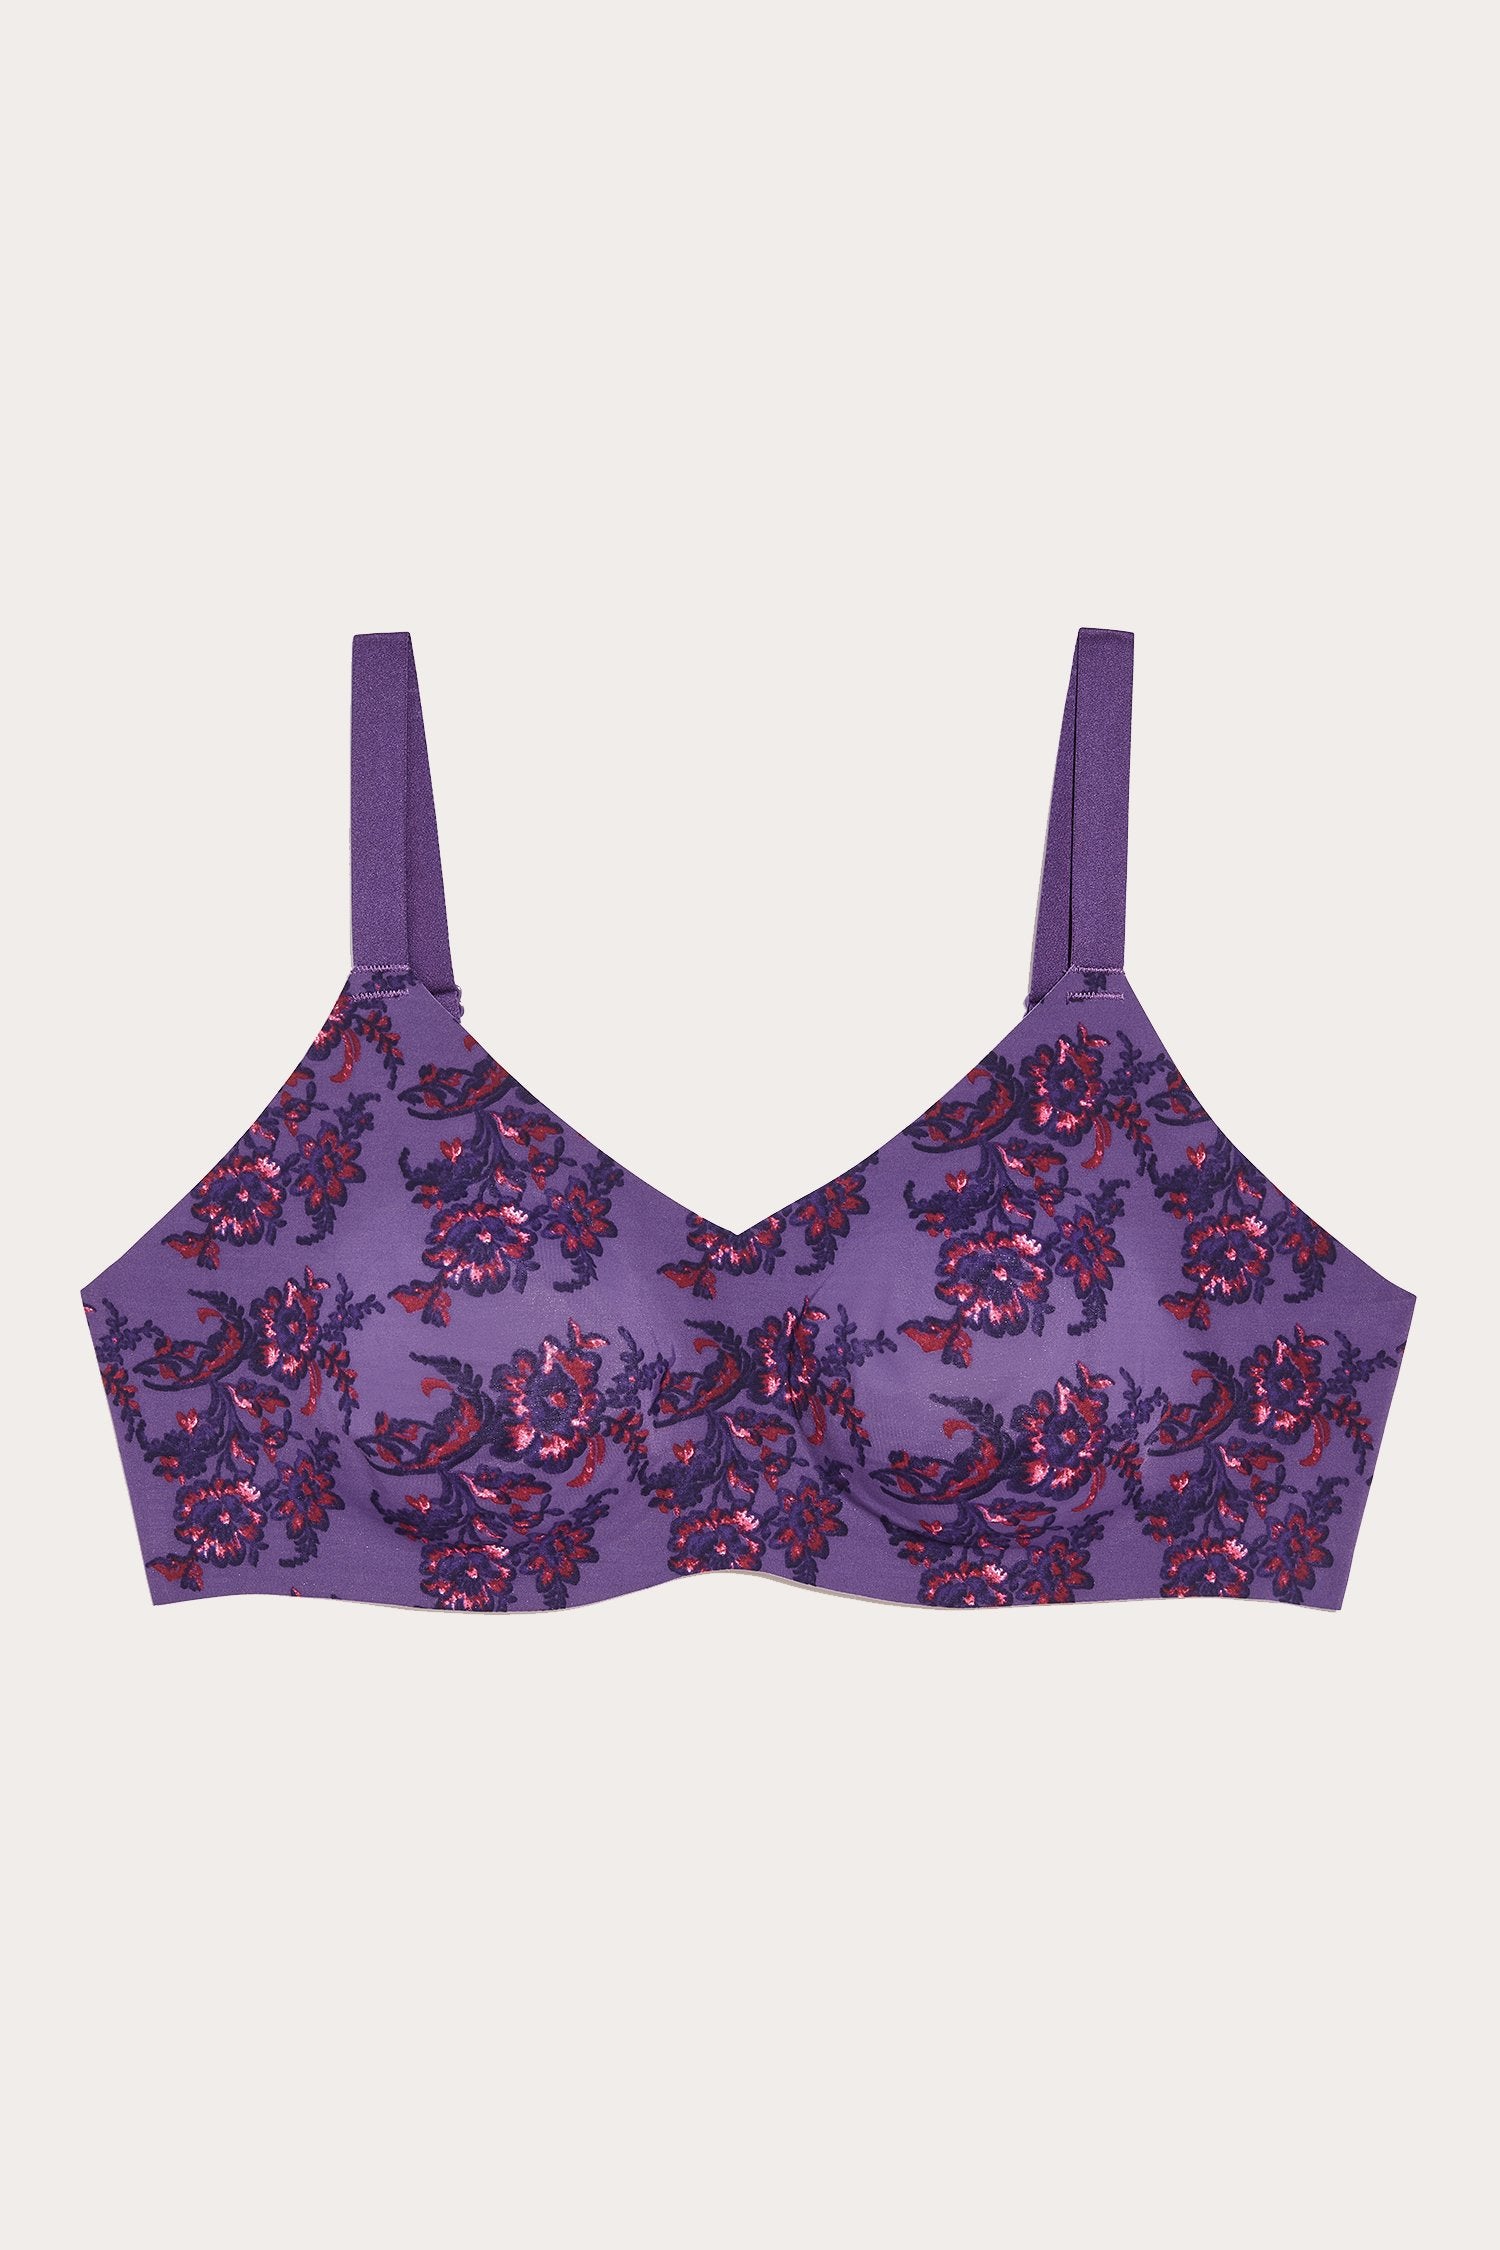 Anna Sui x Knix Autumn Evenings Luxe V-Neck Padded Bra - Anna Sui